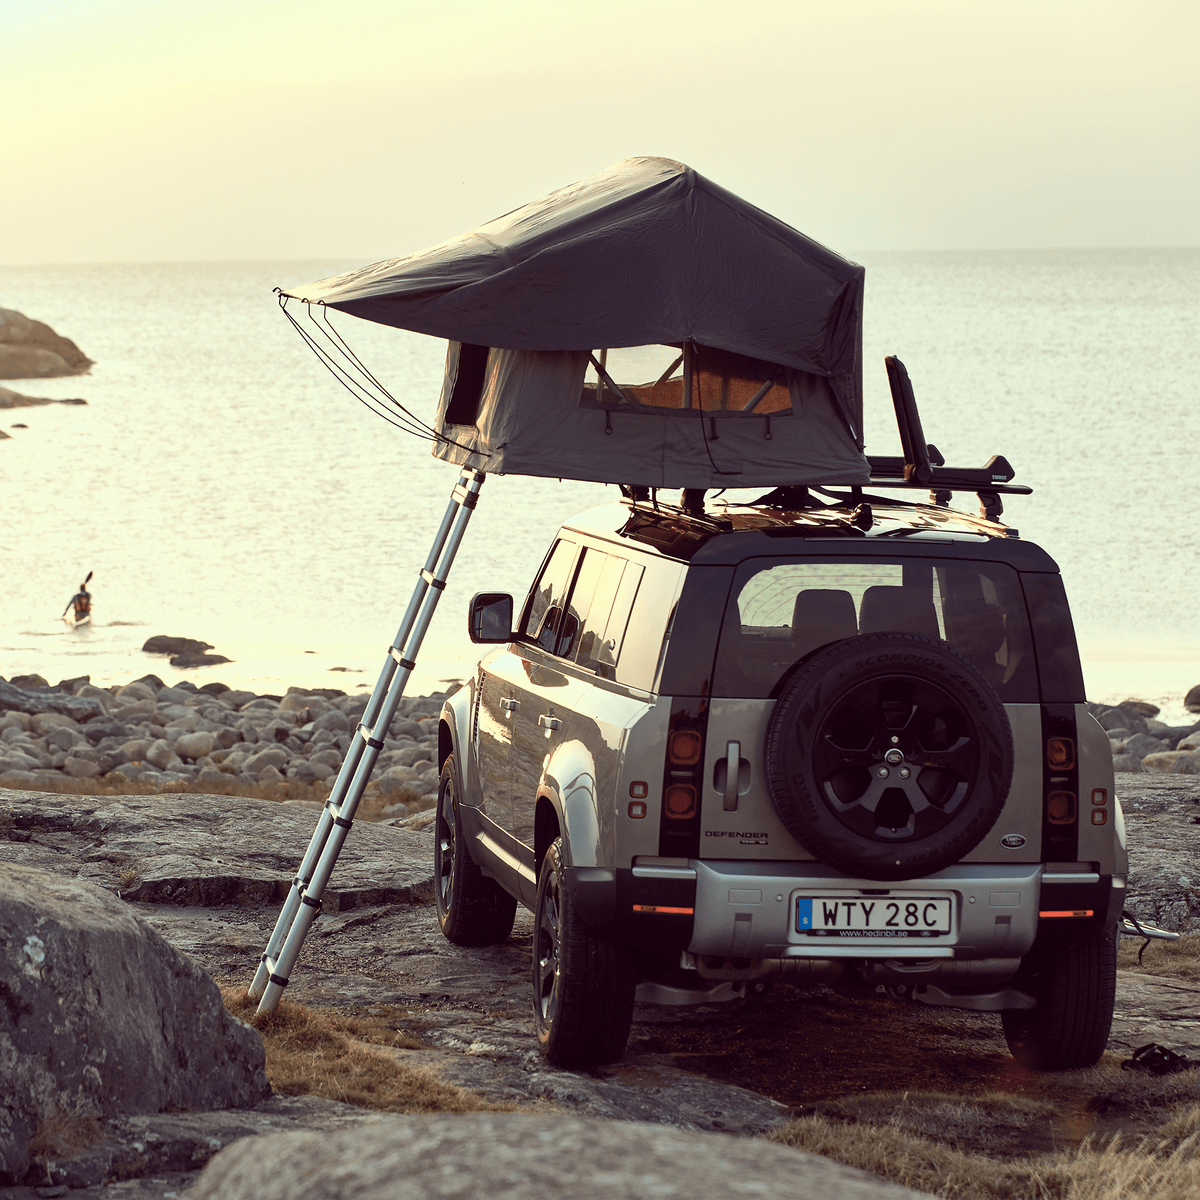 A car with a roof top tent is parked by the sea